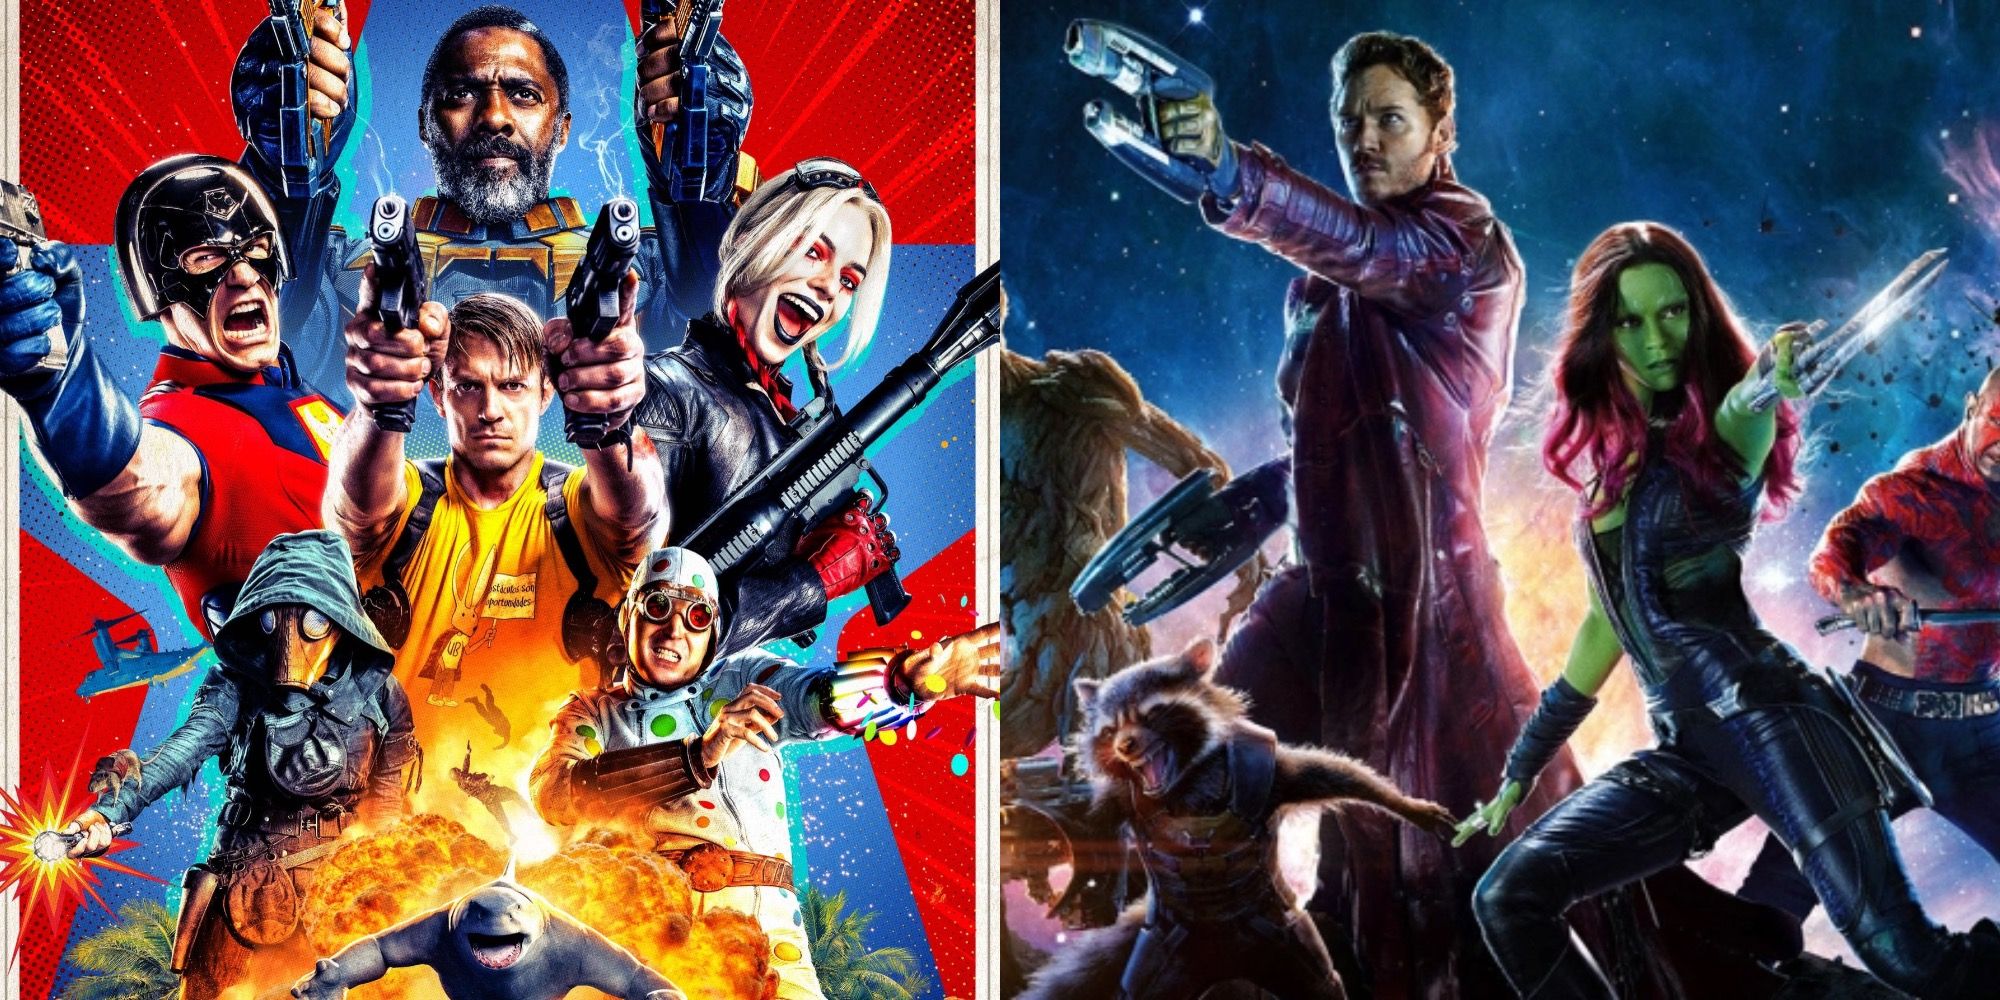 The Suicide Squad 10 Biggest Similarities It Shares With Guardians Of The Galaxy